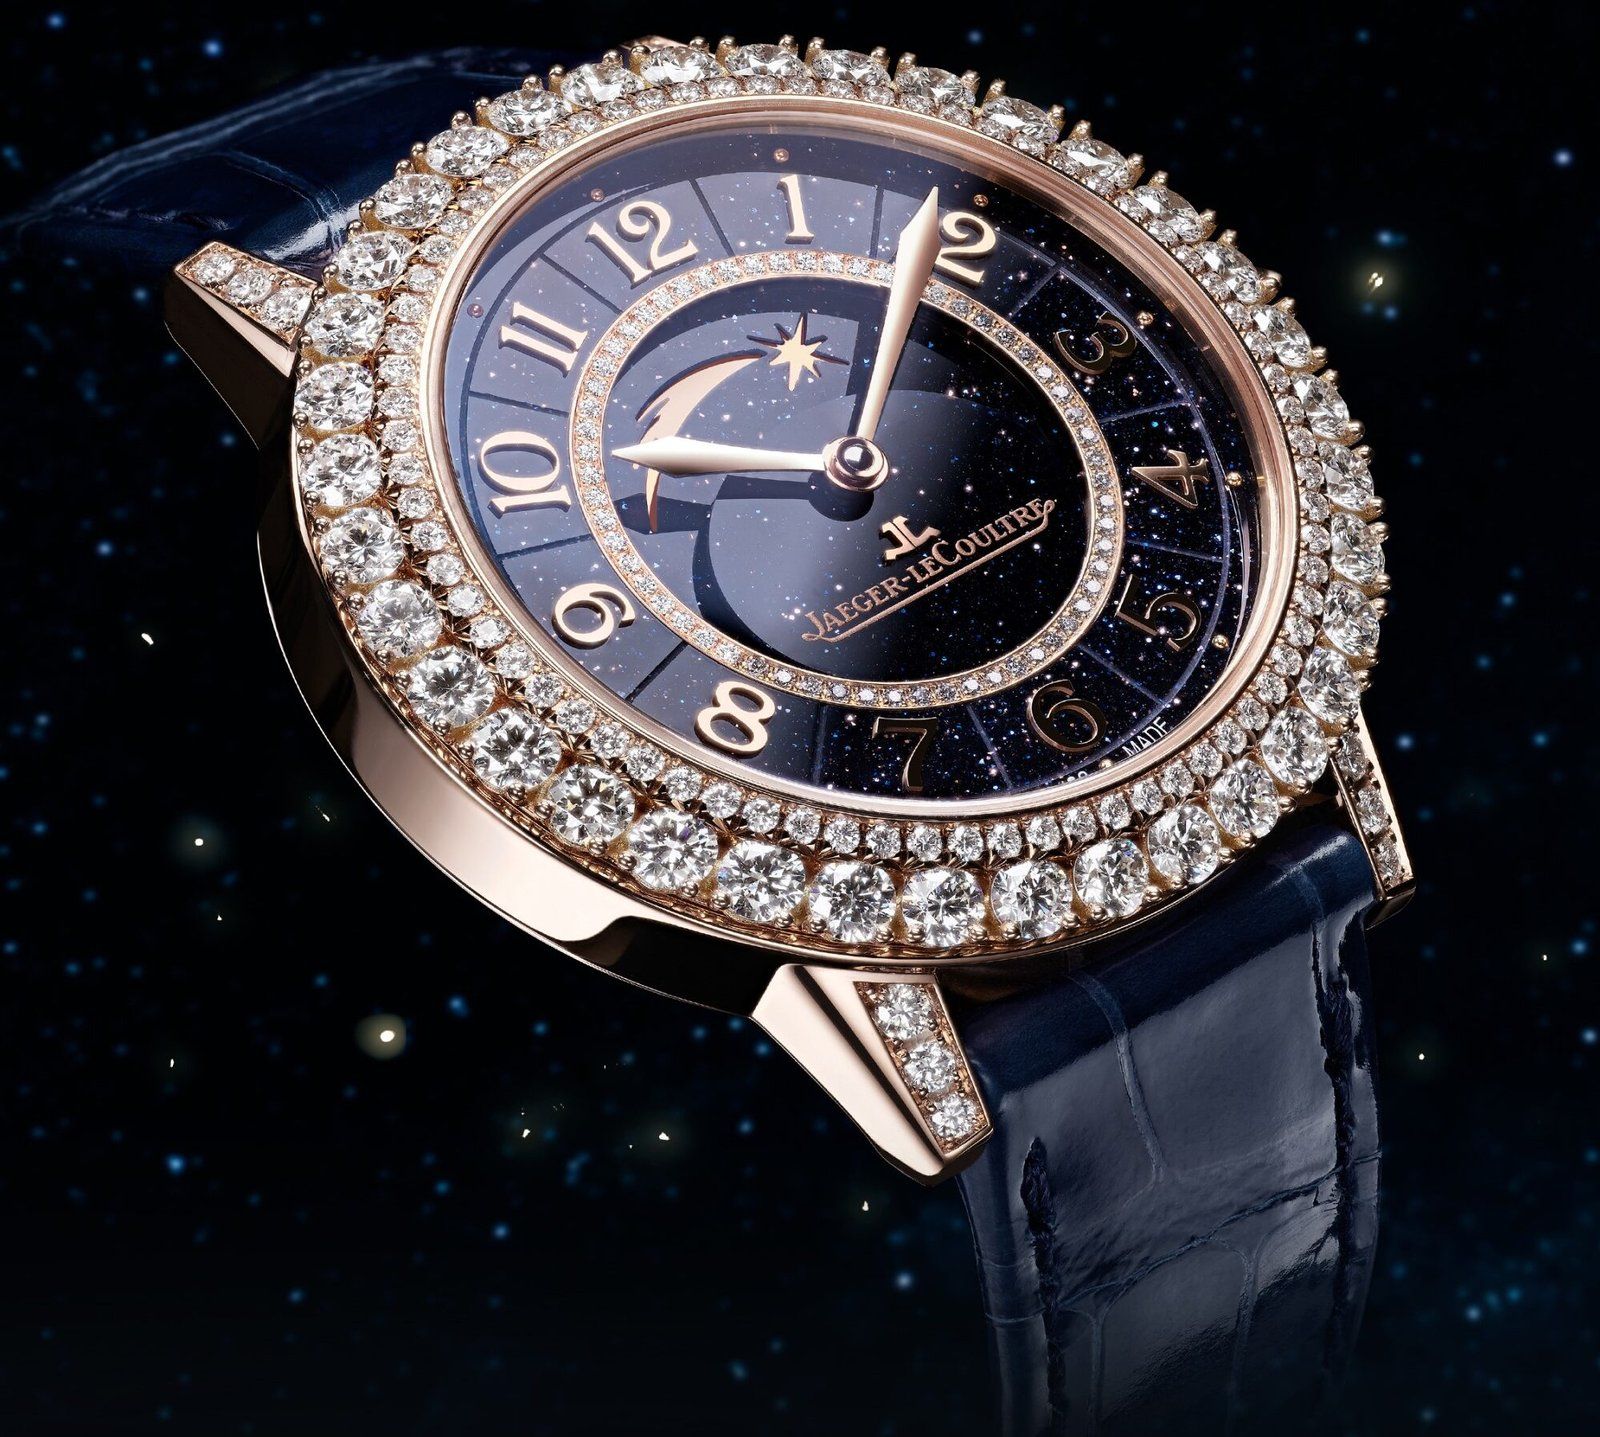 Jaeger-LeCoultre – Shooting for the Stars with the Rendez-Vous Dazzling Star